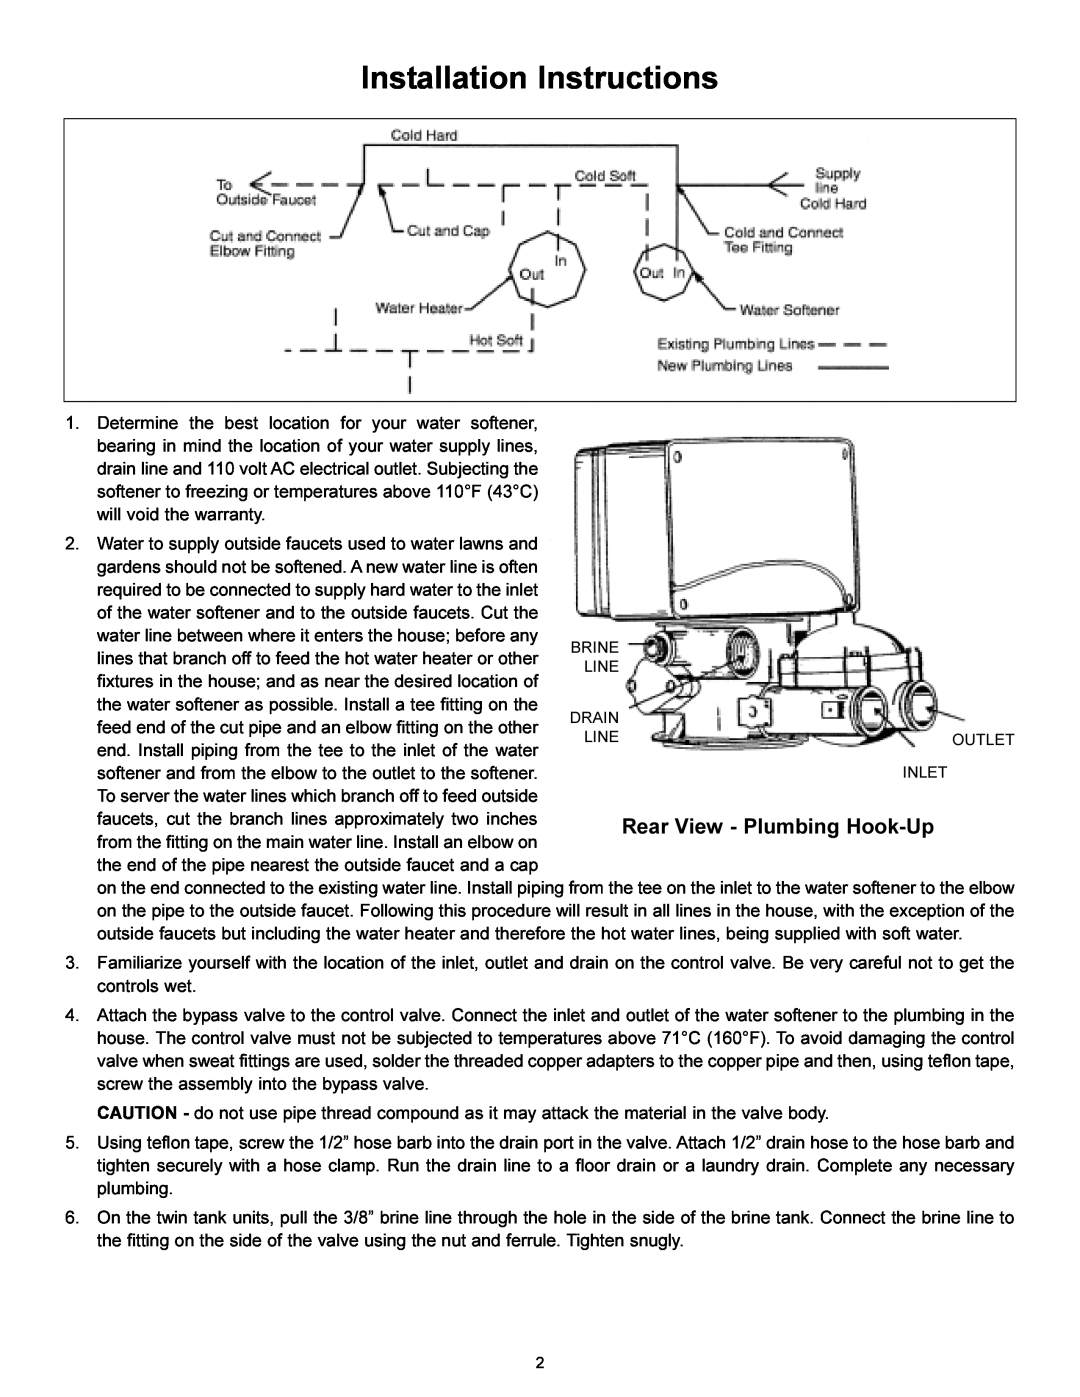 HydroSurge 5600 operation manual Installation Instructions, Outlet 